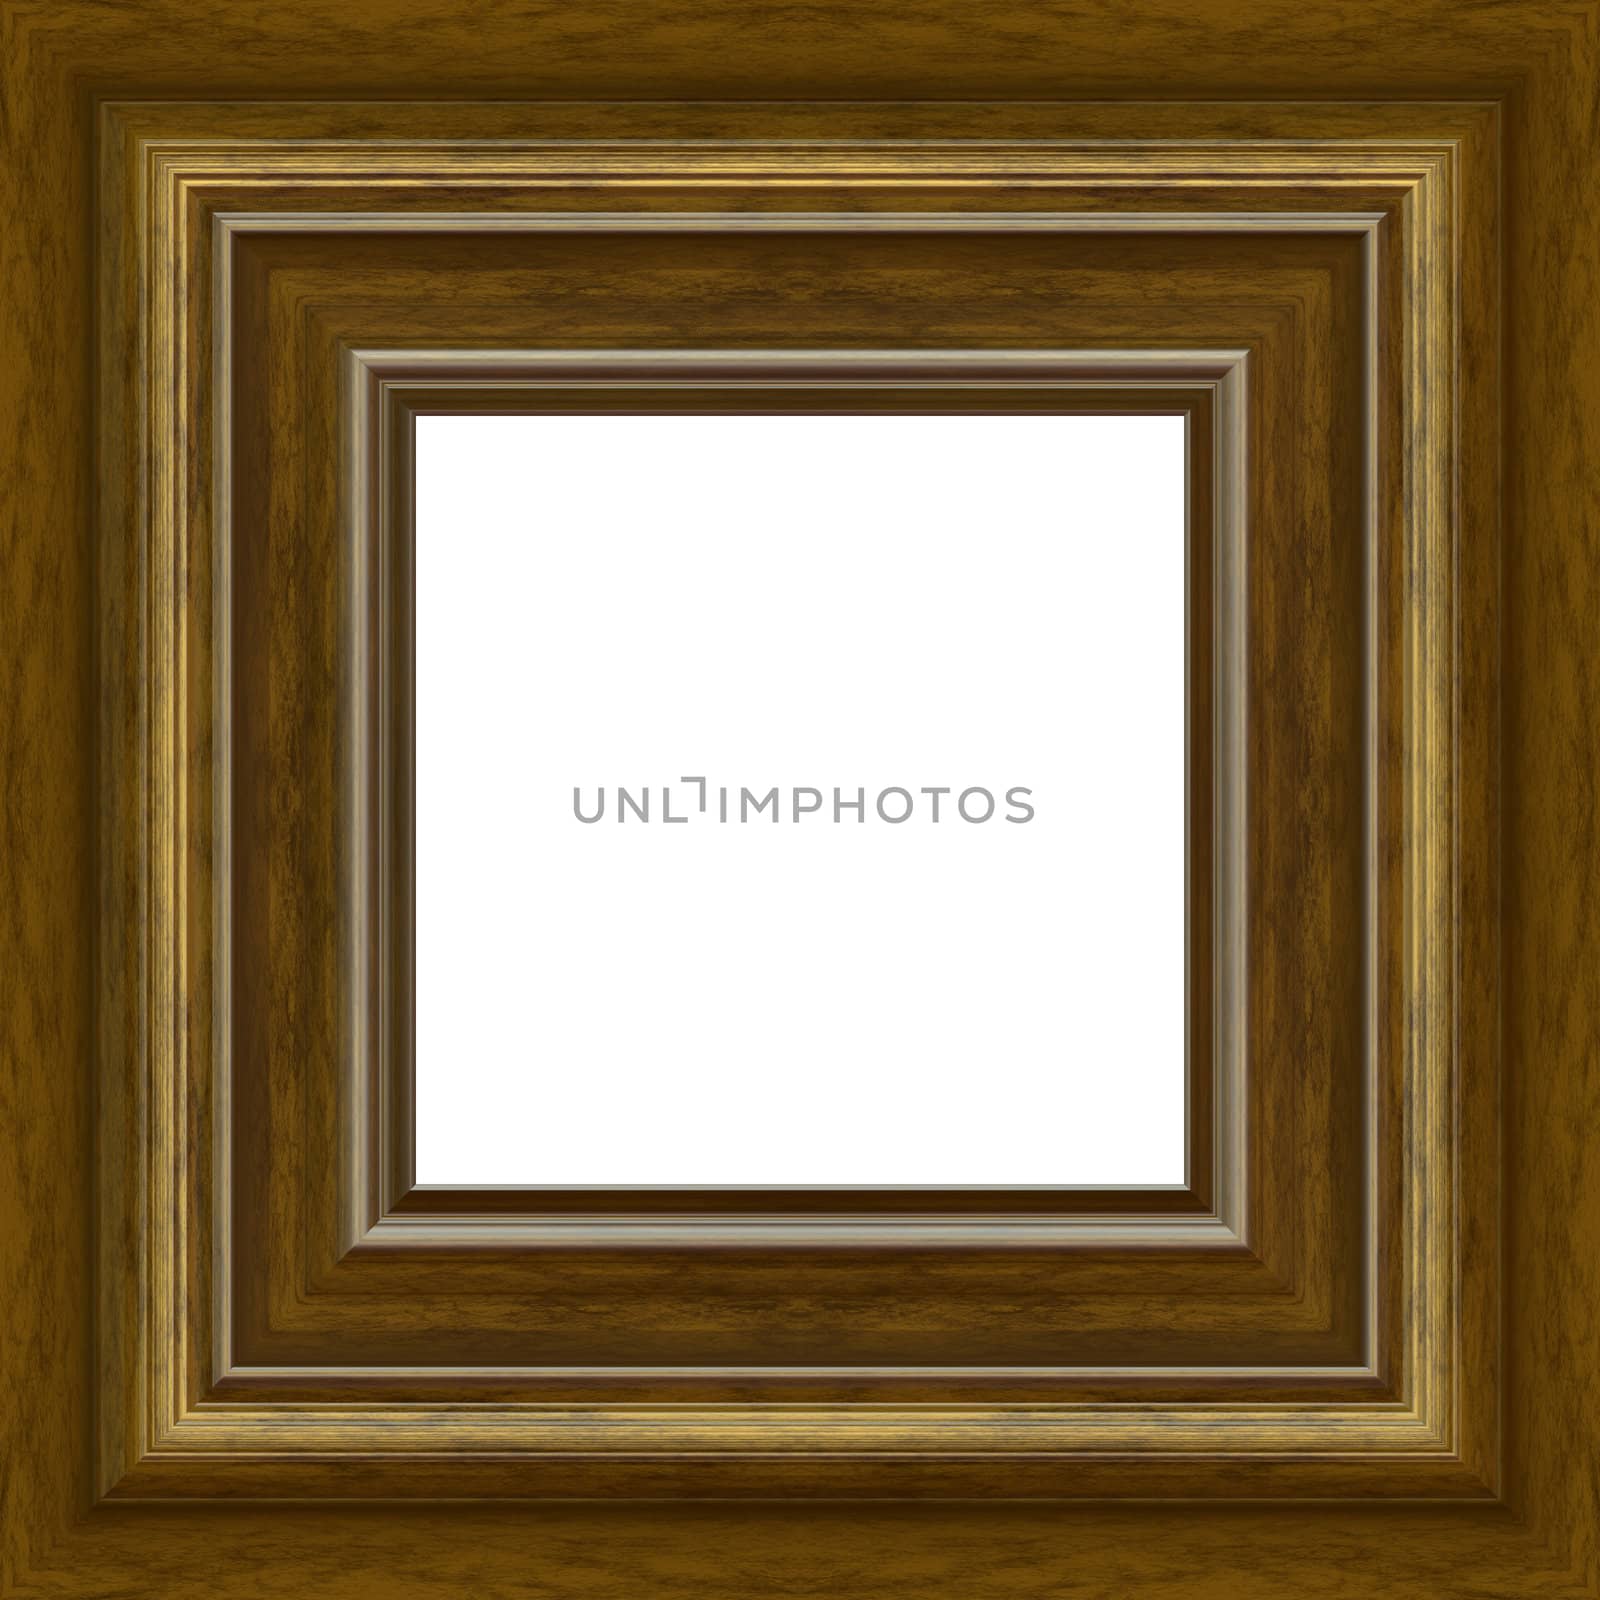 A fancy wooden photo frame border with copy space.  Clipping path is included for the white center area.